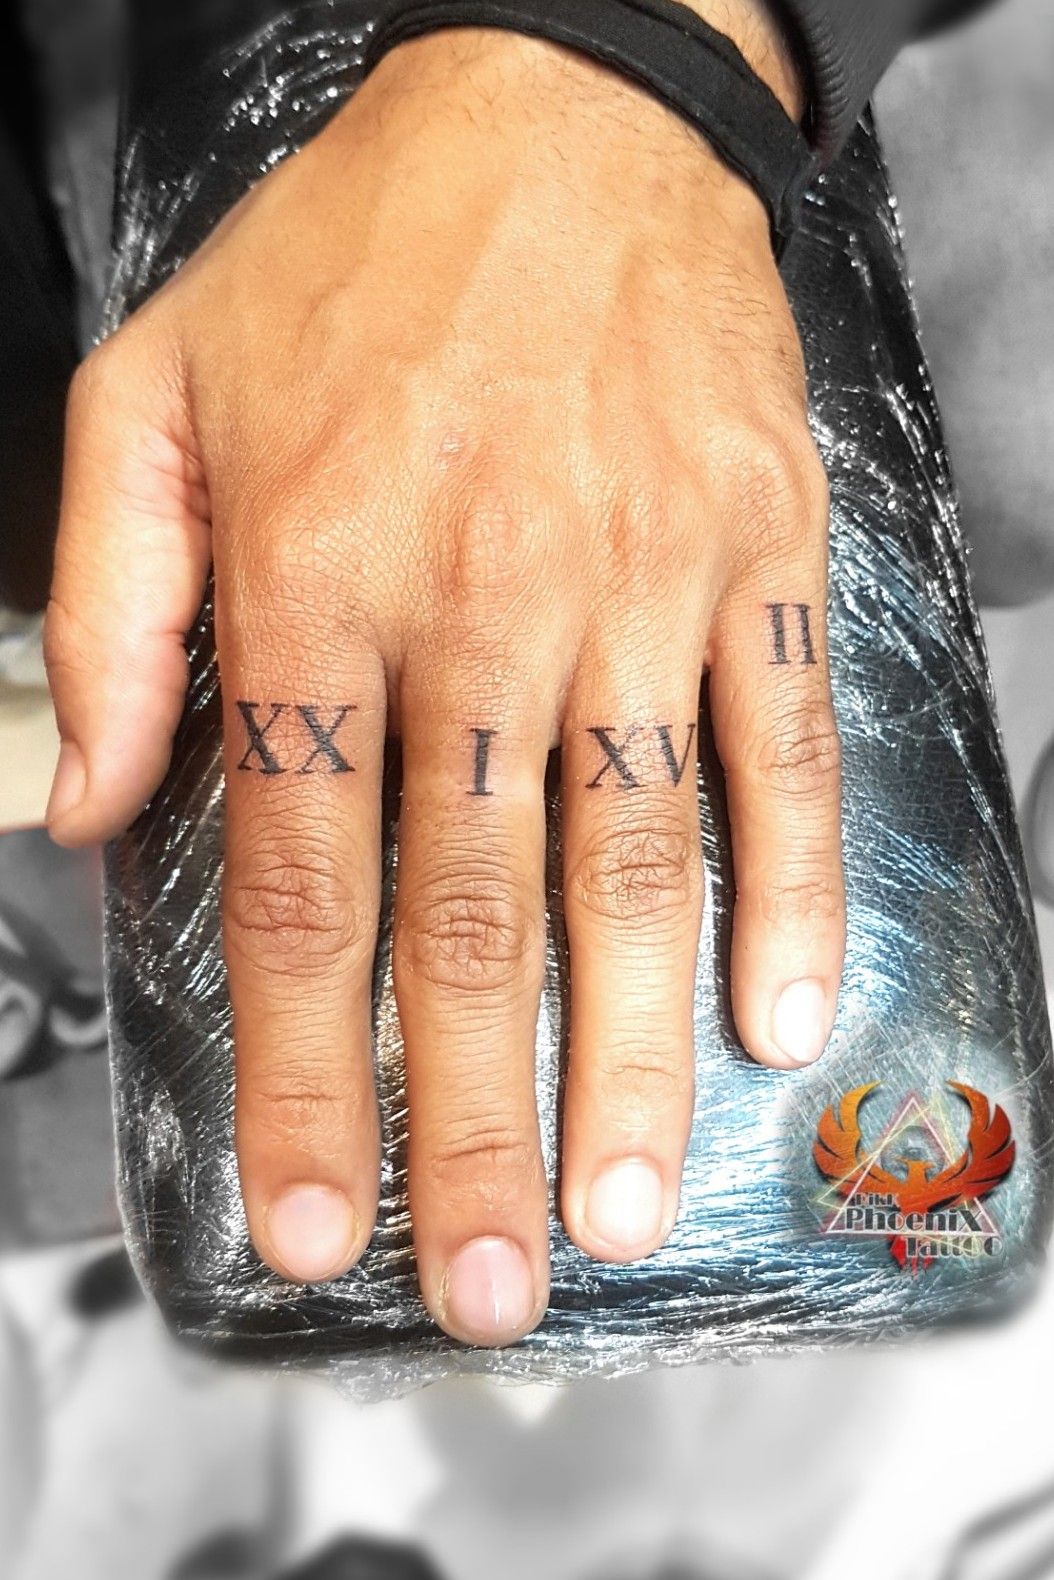 250 Birth Date Tattoos Ideas 2020 Roman Numeral Designs With Beautiful  Fonts  Finger tattoo for women Small finger tattoos Date tattoos